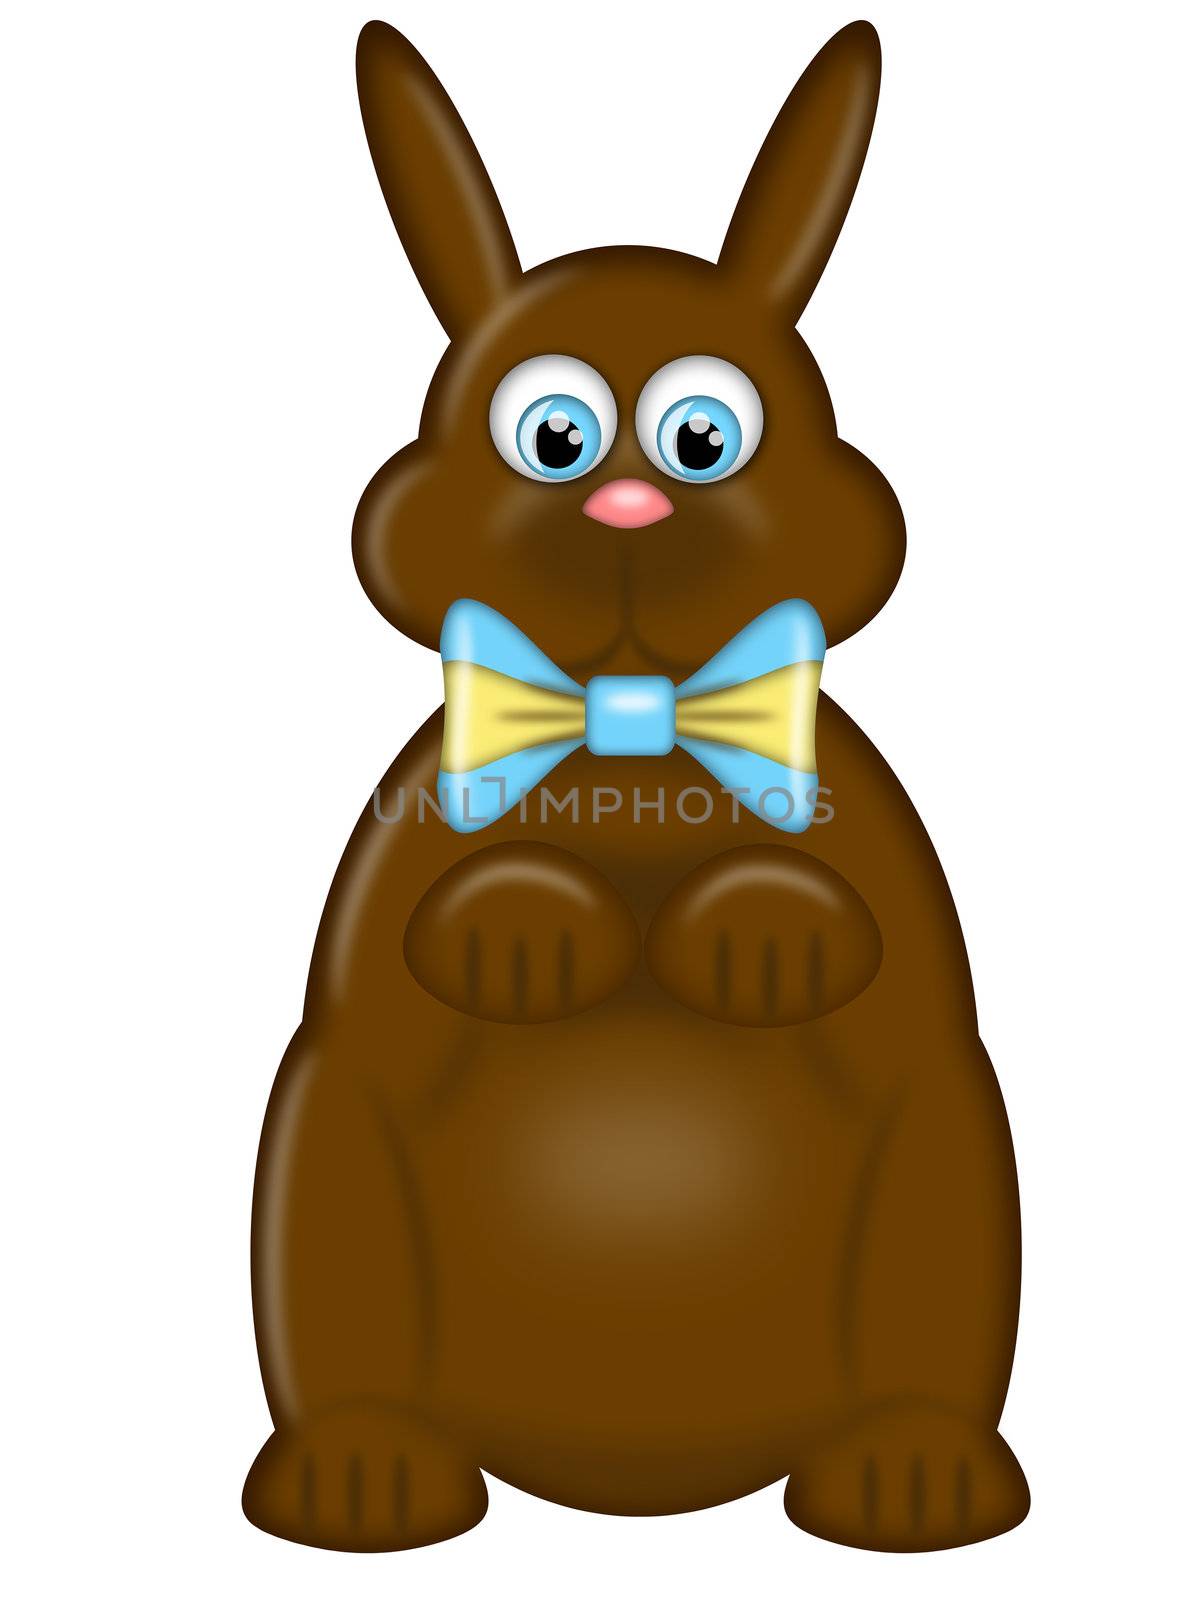 Happy Easter Chocolate Bunny Rabbit with Bow Illustration